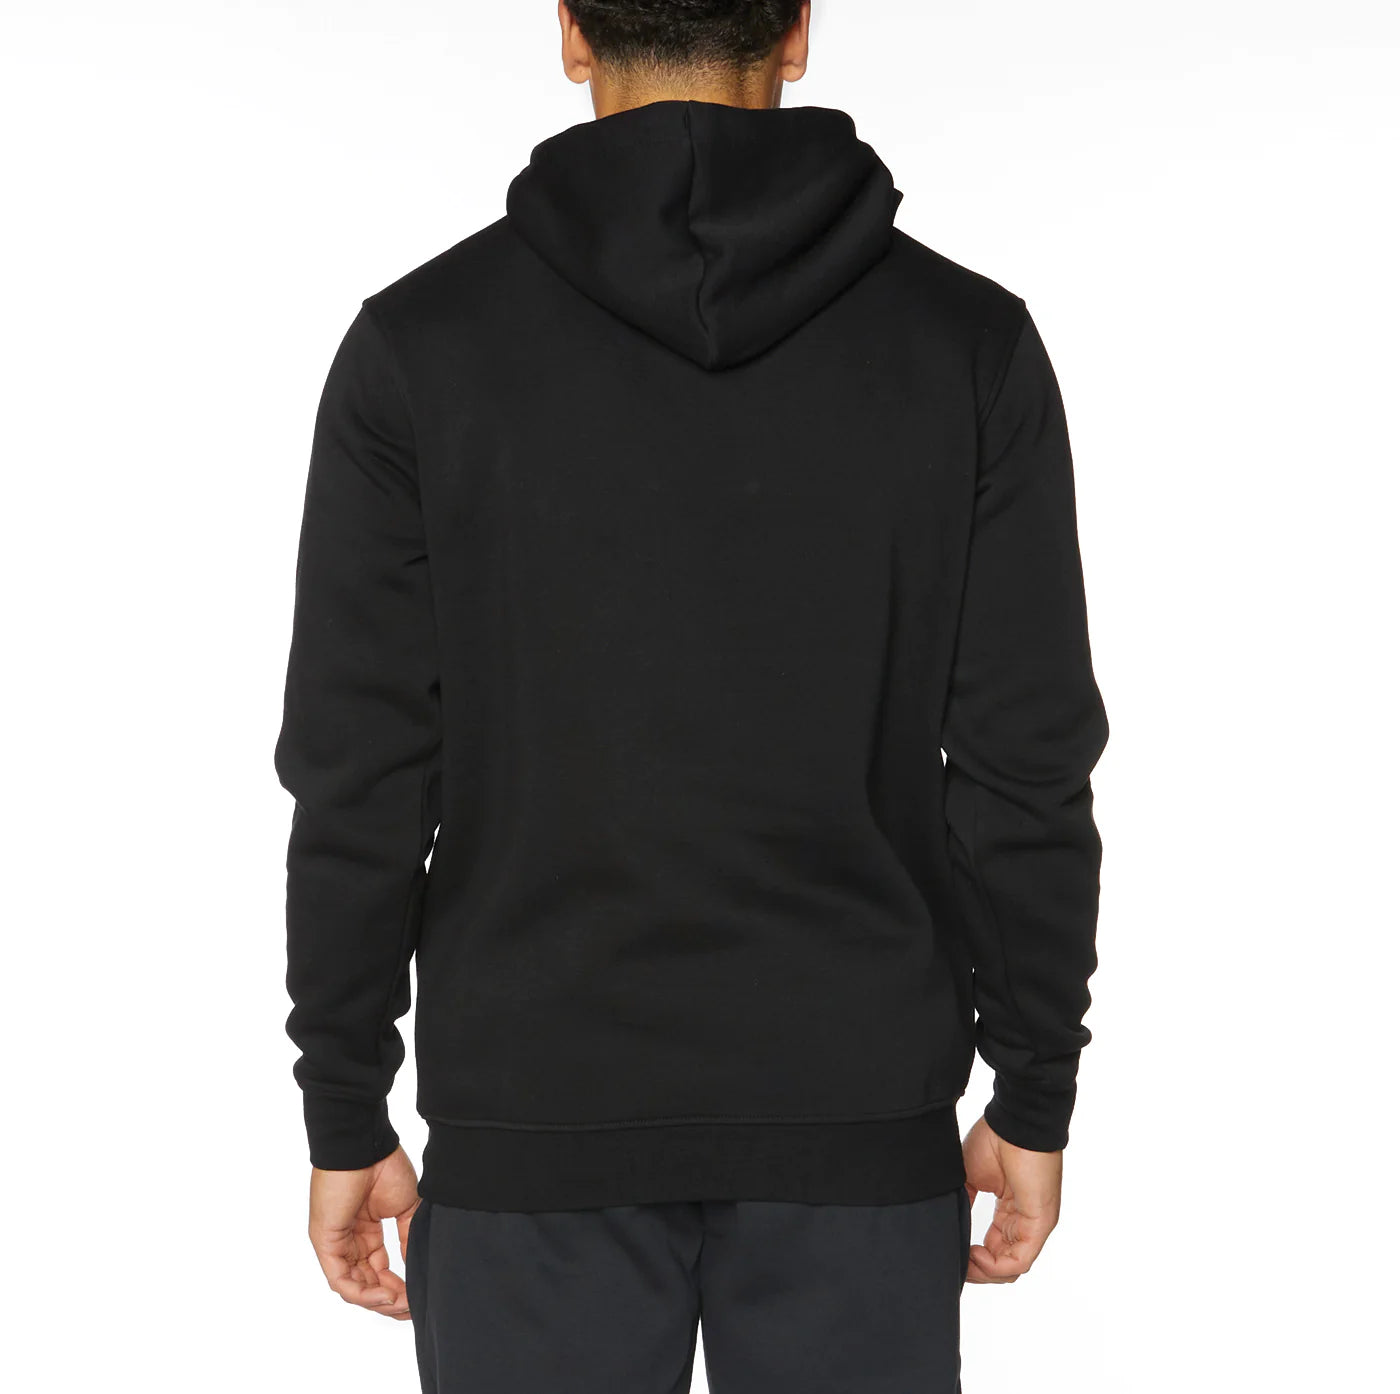 KAPPA Authentic Malmo 2 Pullover Hoodie - Black Combo